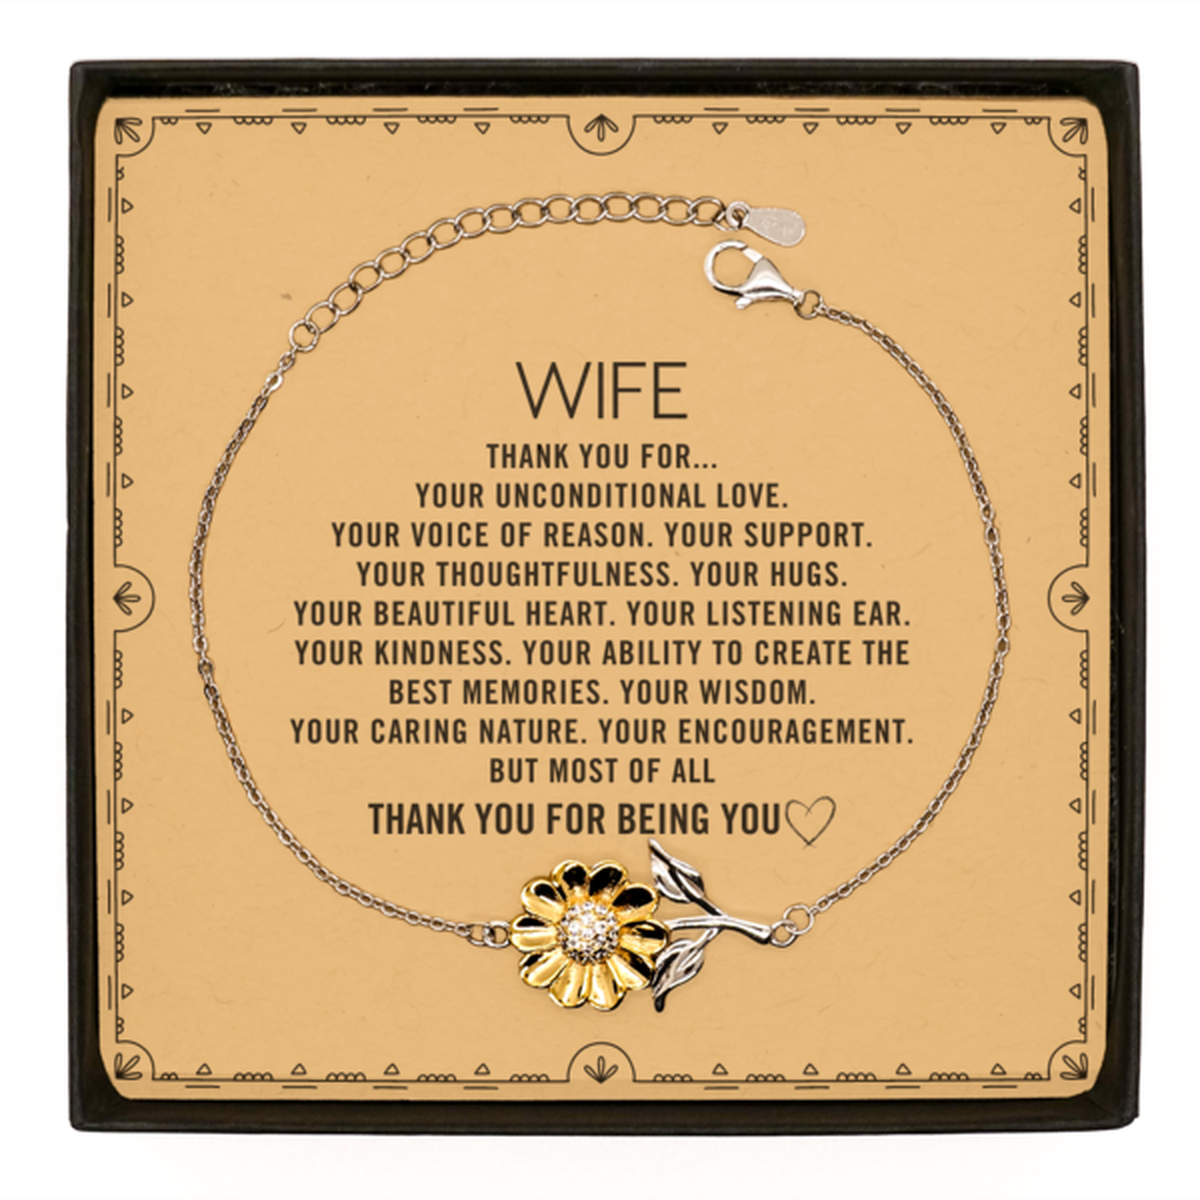 Wife Sunflower Bracelet Custom, Message Card Gifts For Wife Christmas Graduation Birthday Gifts for Men Women Wife Thank you for Your unconditional love